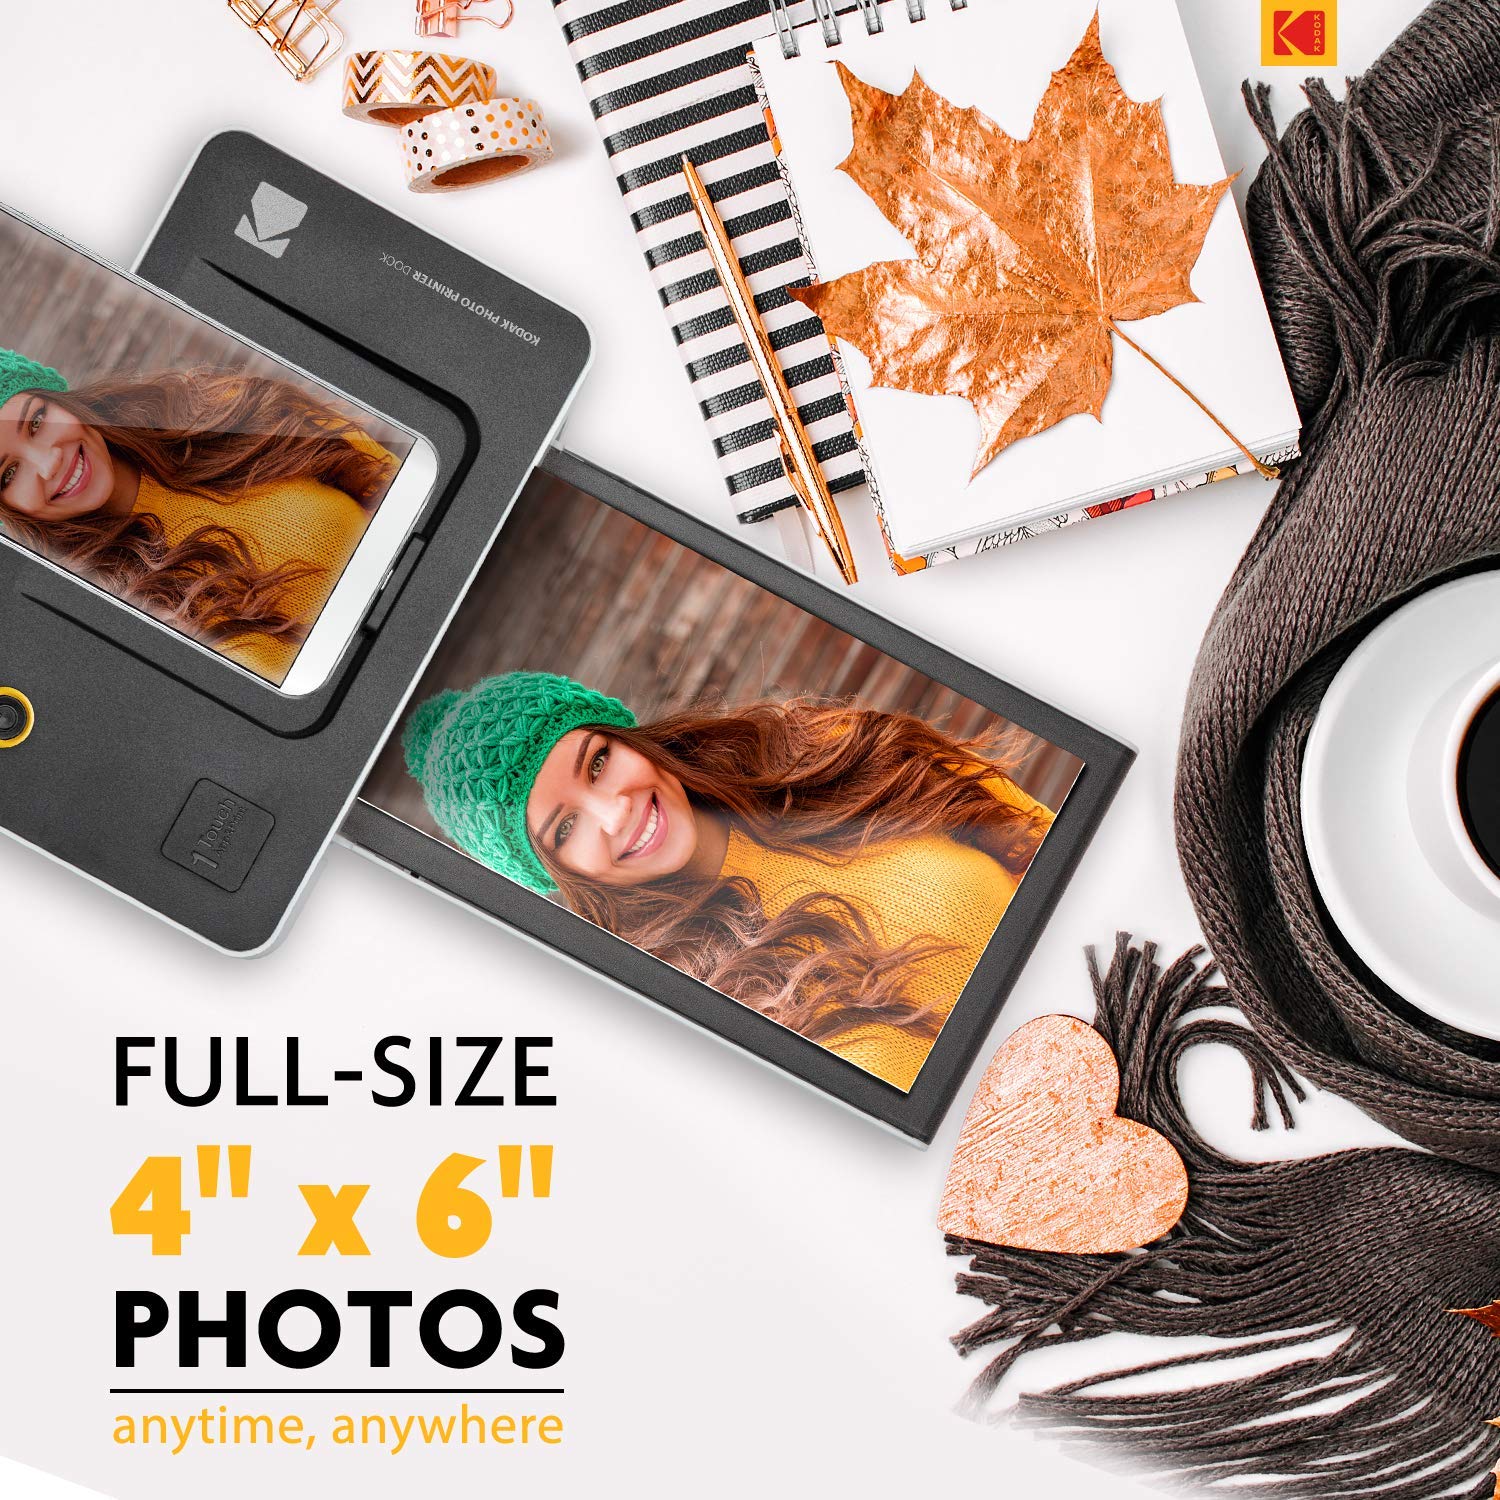 Kodak Dock & Wi-Fi Portable 4x6 Instant Photo Printer, Premium Quality Full Color Prints - Compatible w/iOS & Android Devices - image 3 of 11